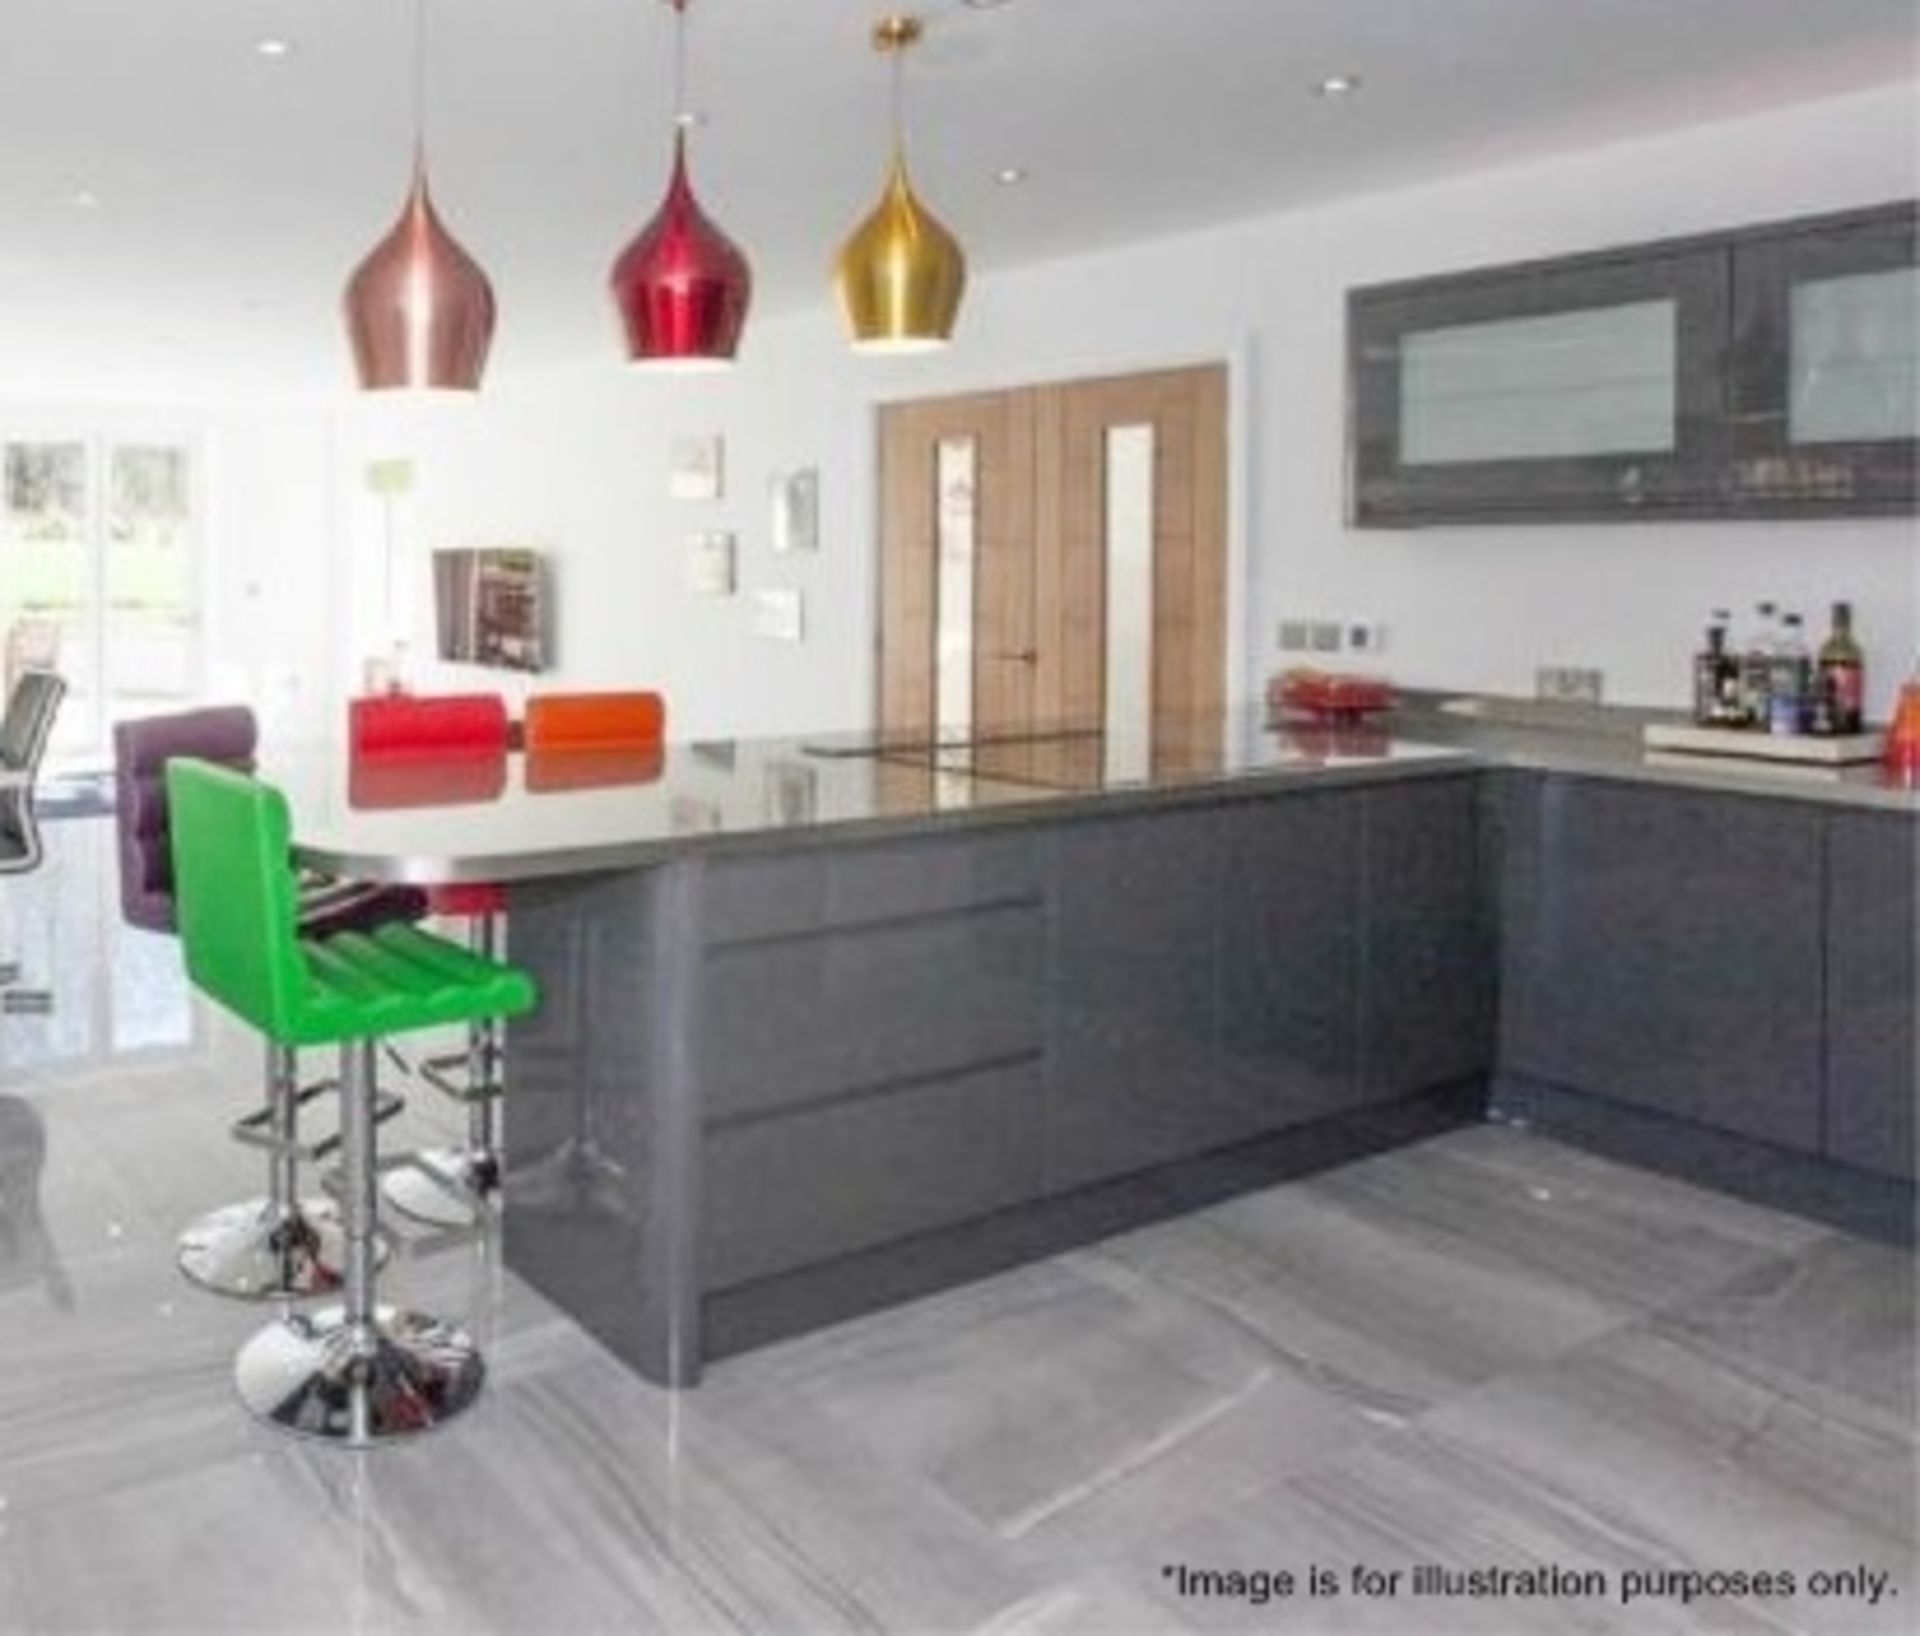 1 x Handleless Bespoke Fitted WREN Kitchen With Integrated Neff Appliances And Laminate Worktops - Image 2 of 72